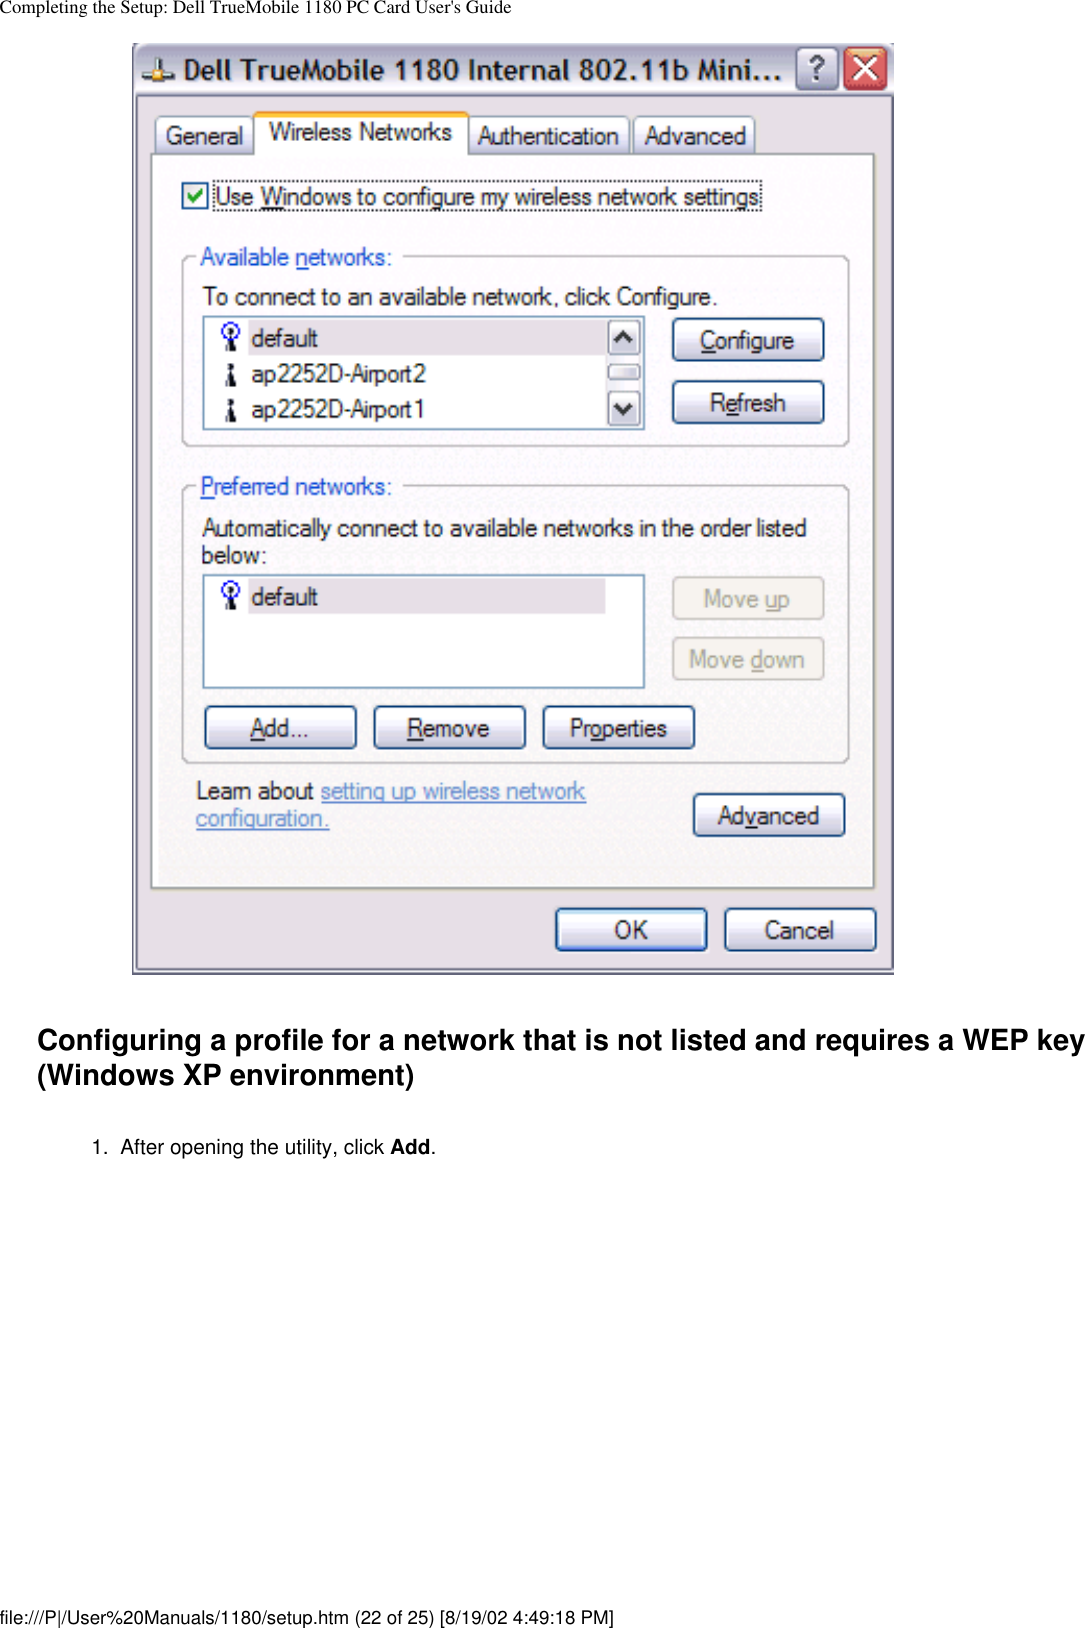 Completing the Setup: Dell TrueMobile 1180 PC Card User&apos;s GuideConfiguring a profile for a network that is not listed and requires a WEP key (Windows XP environment)1.  After opening the utility, click Add. file:///P|/User%20Manuals/1180/setup.htm (22 of 25) [8/19/02 4:49:18 PM]